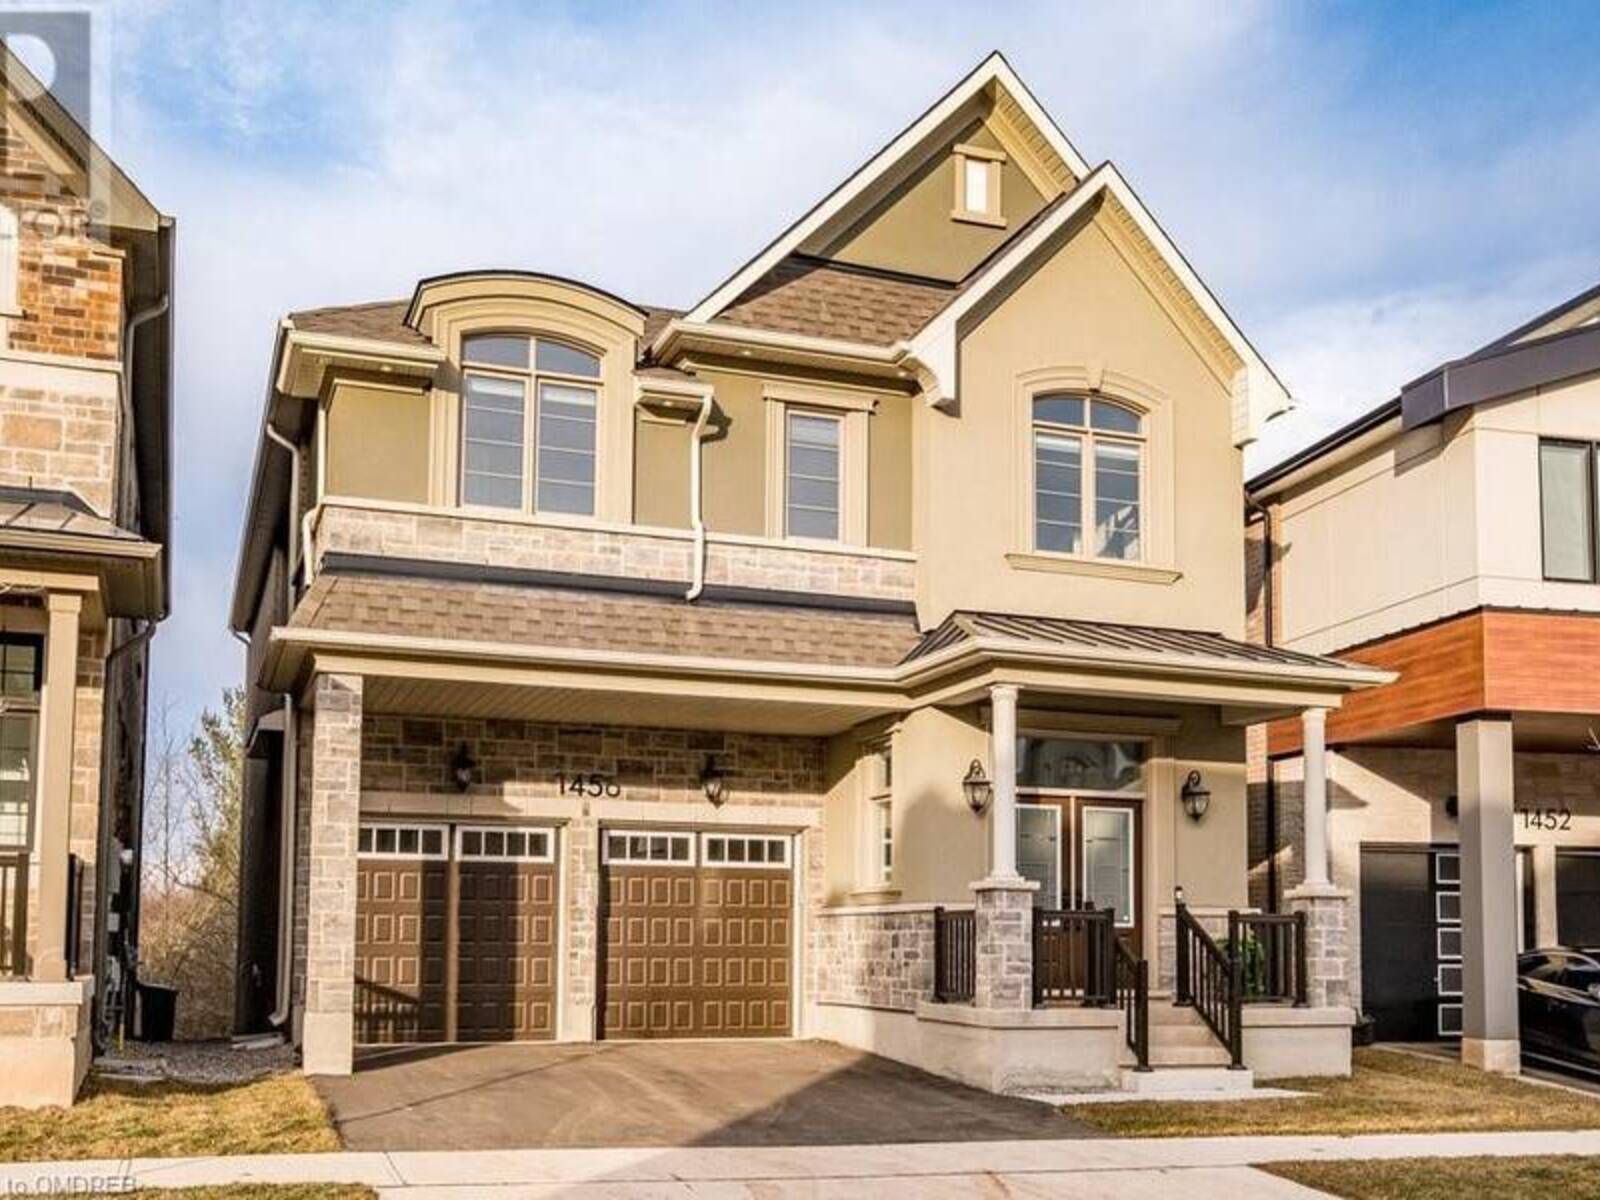 1456 FORD STRATHY CRESCENT, Oakville, Ontario L6H 3W9